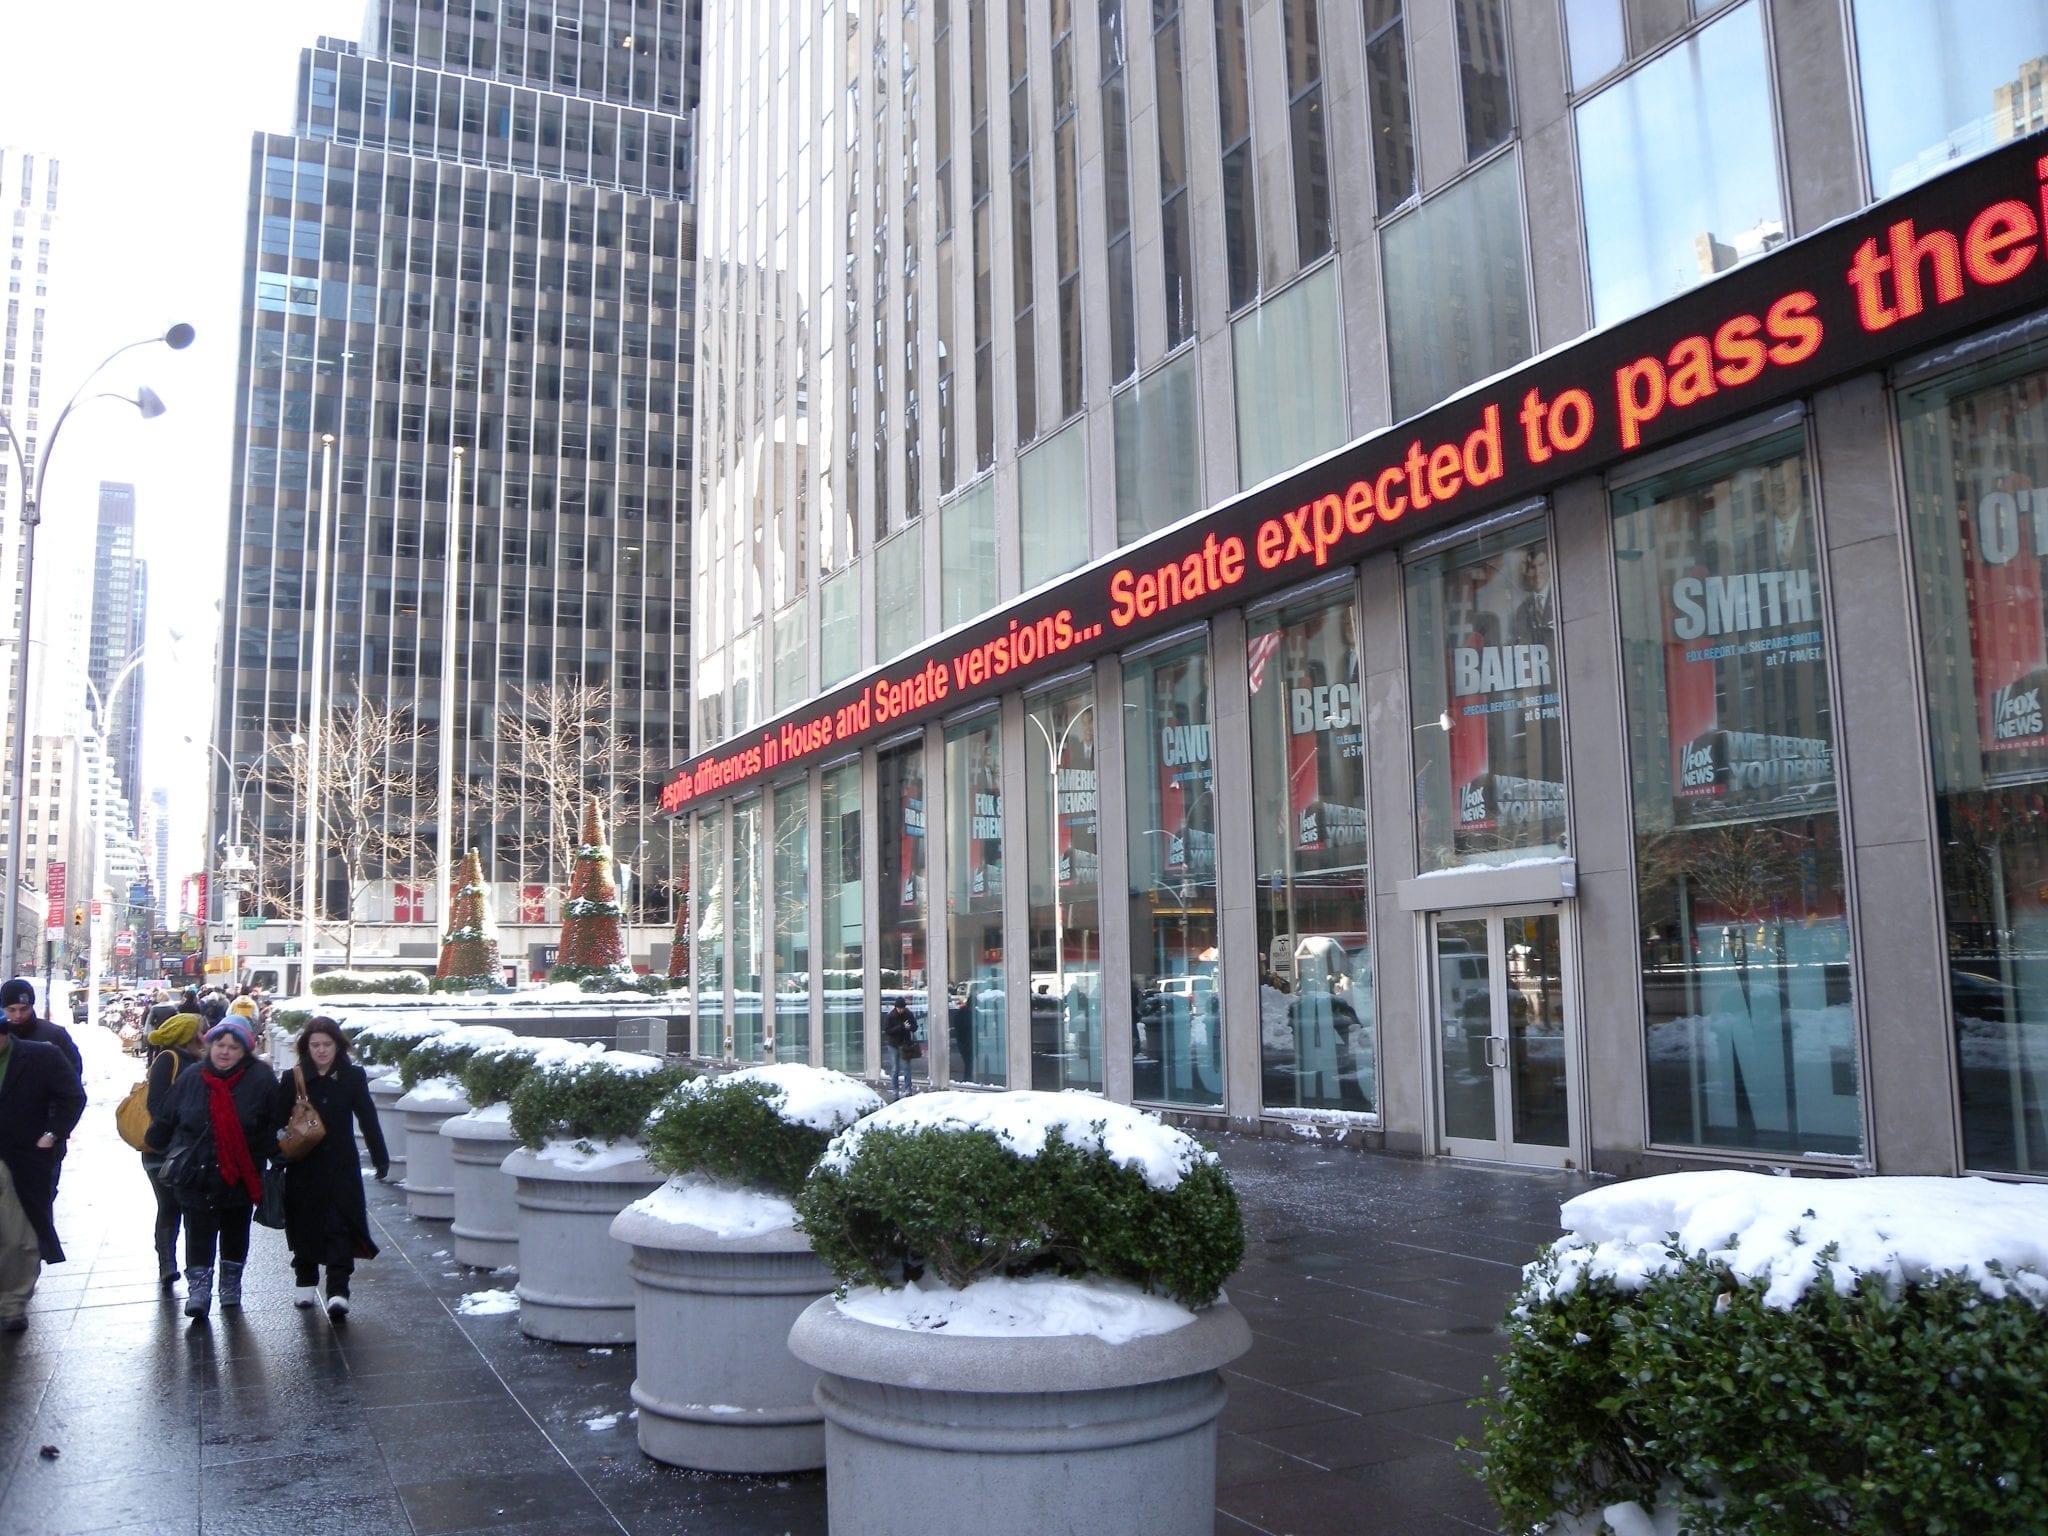 Looking east towards 6th Avenue along north (48th Street) side of Fox News building on a snowy afternoon. Image by Jim.henderson, CC0, from Wikimedia Commons.